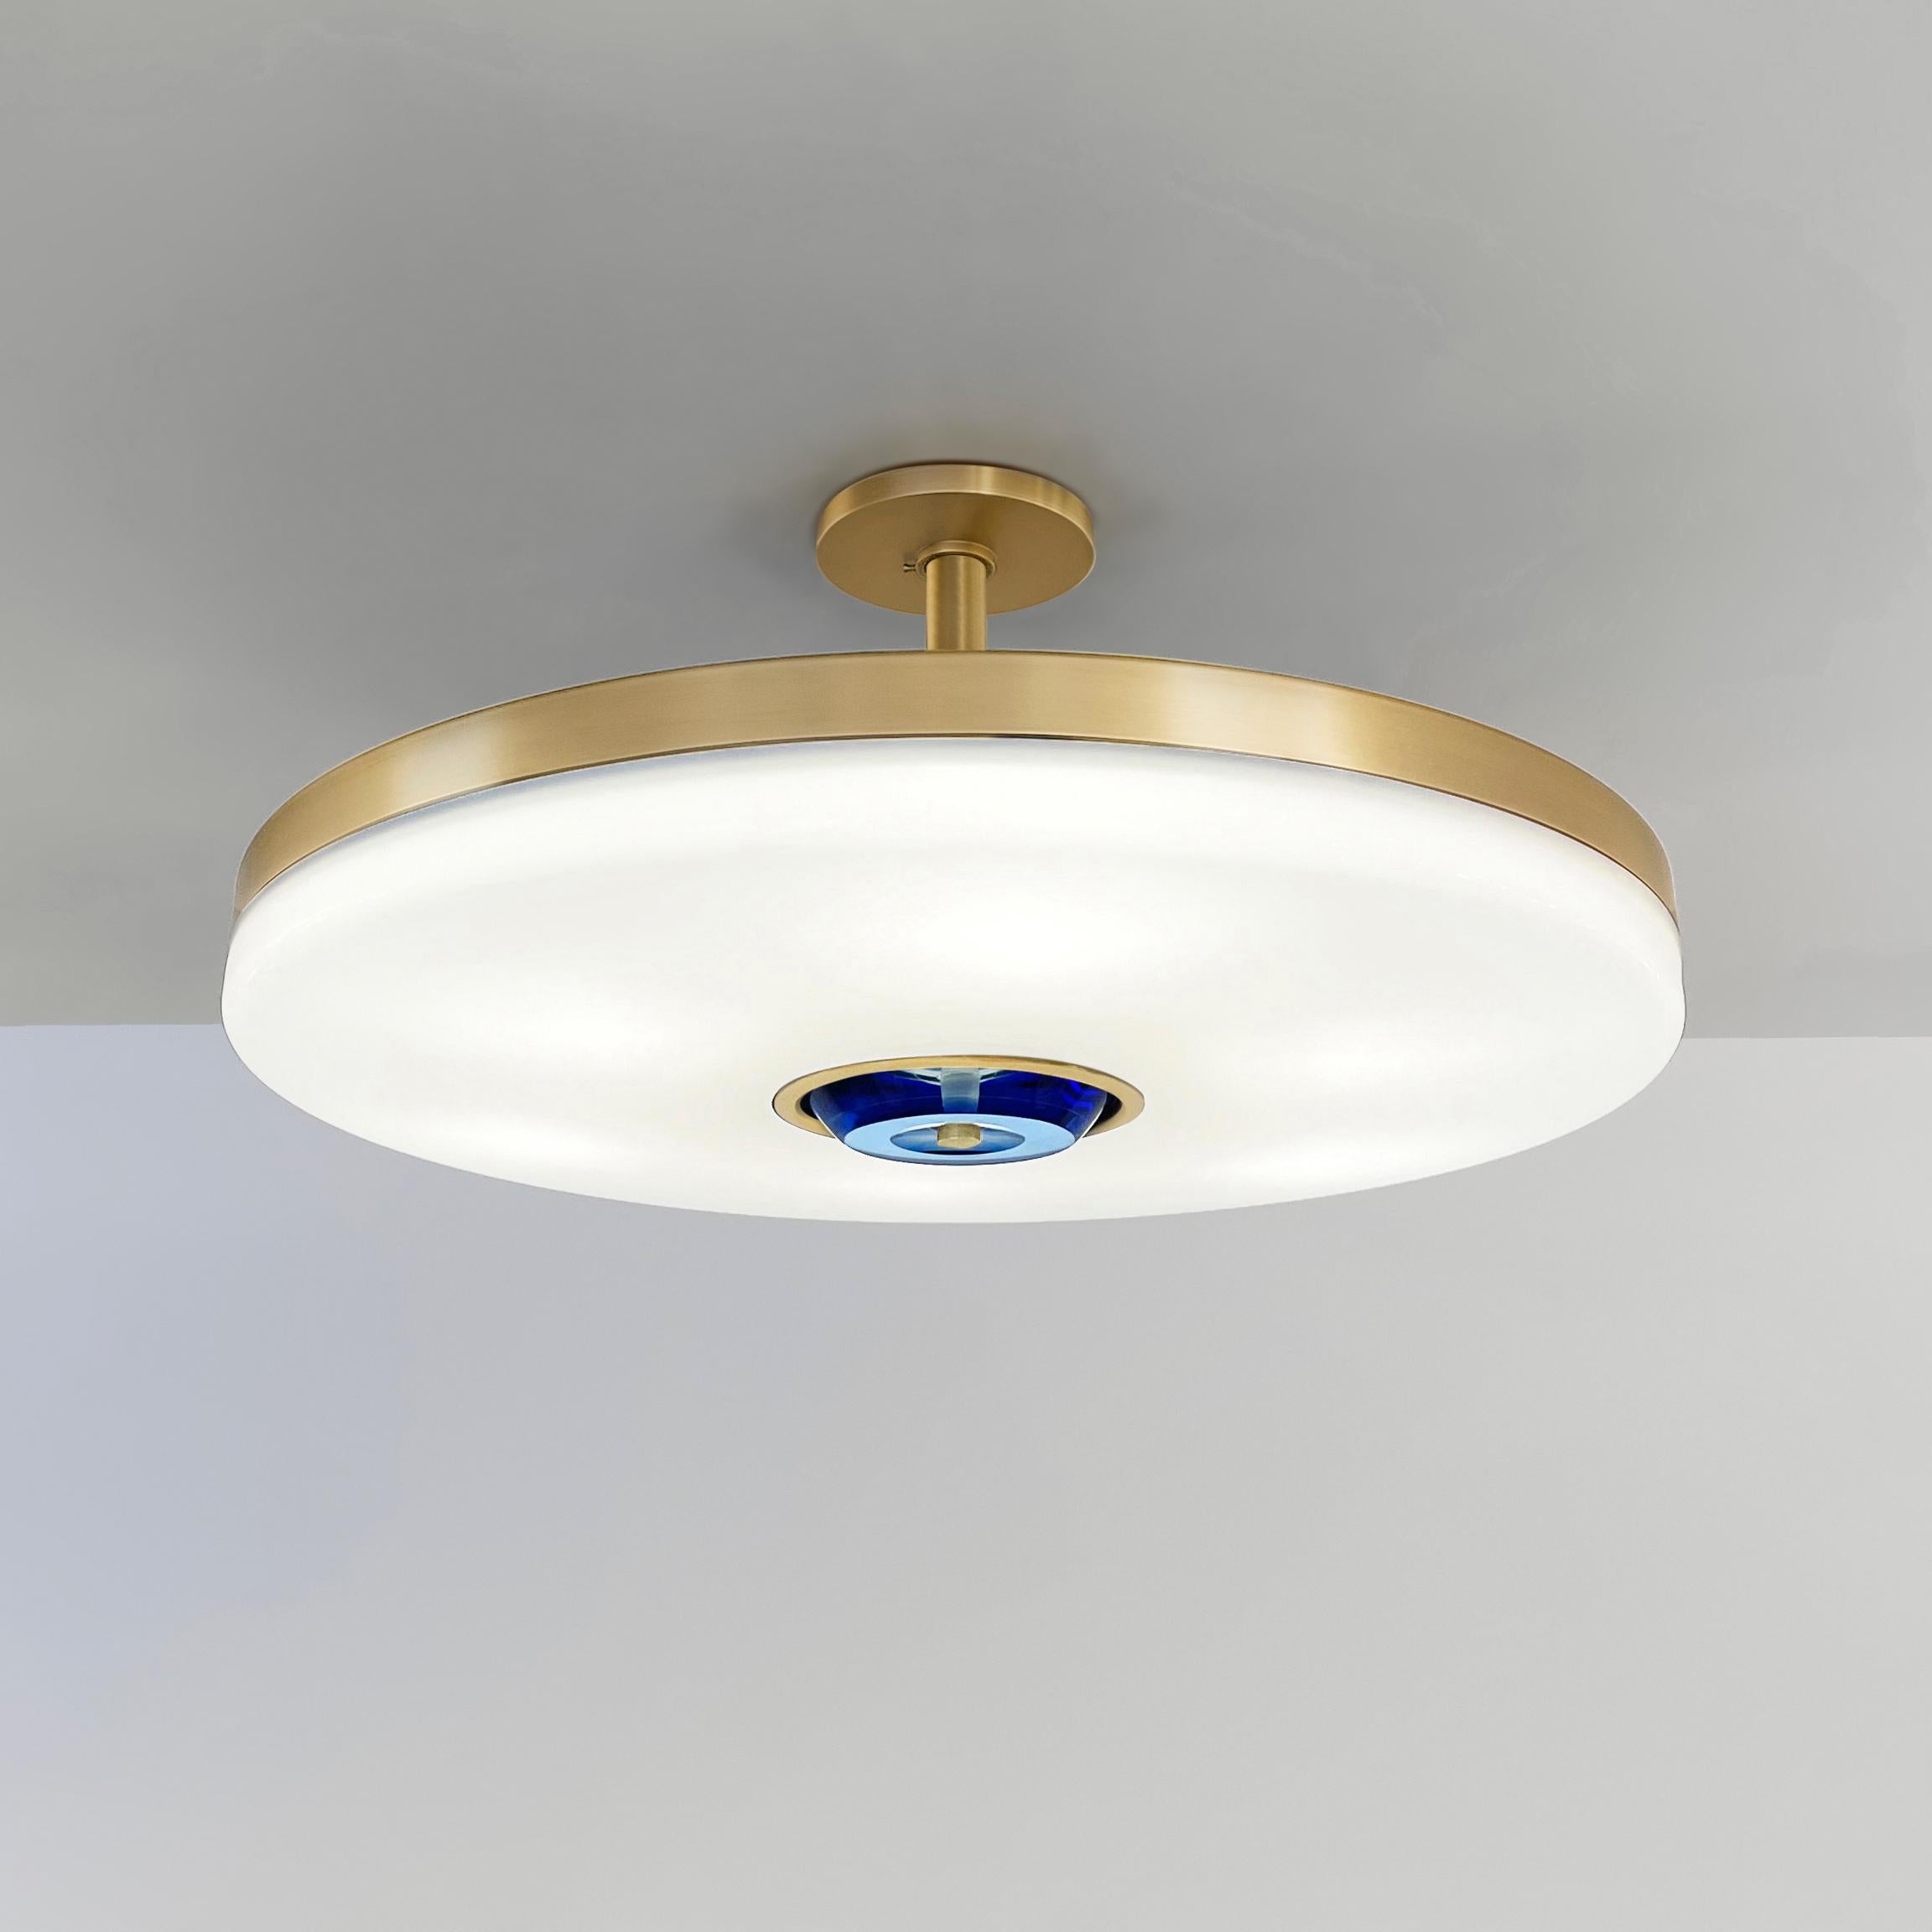 The Iris ceiling is designed around an expansive acrylic shade with a hand carved glass center. This versatile fixture can be installed as a pendant on a stem or as a true flush mount. The first images show the fixture in our satin brass